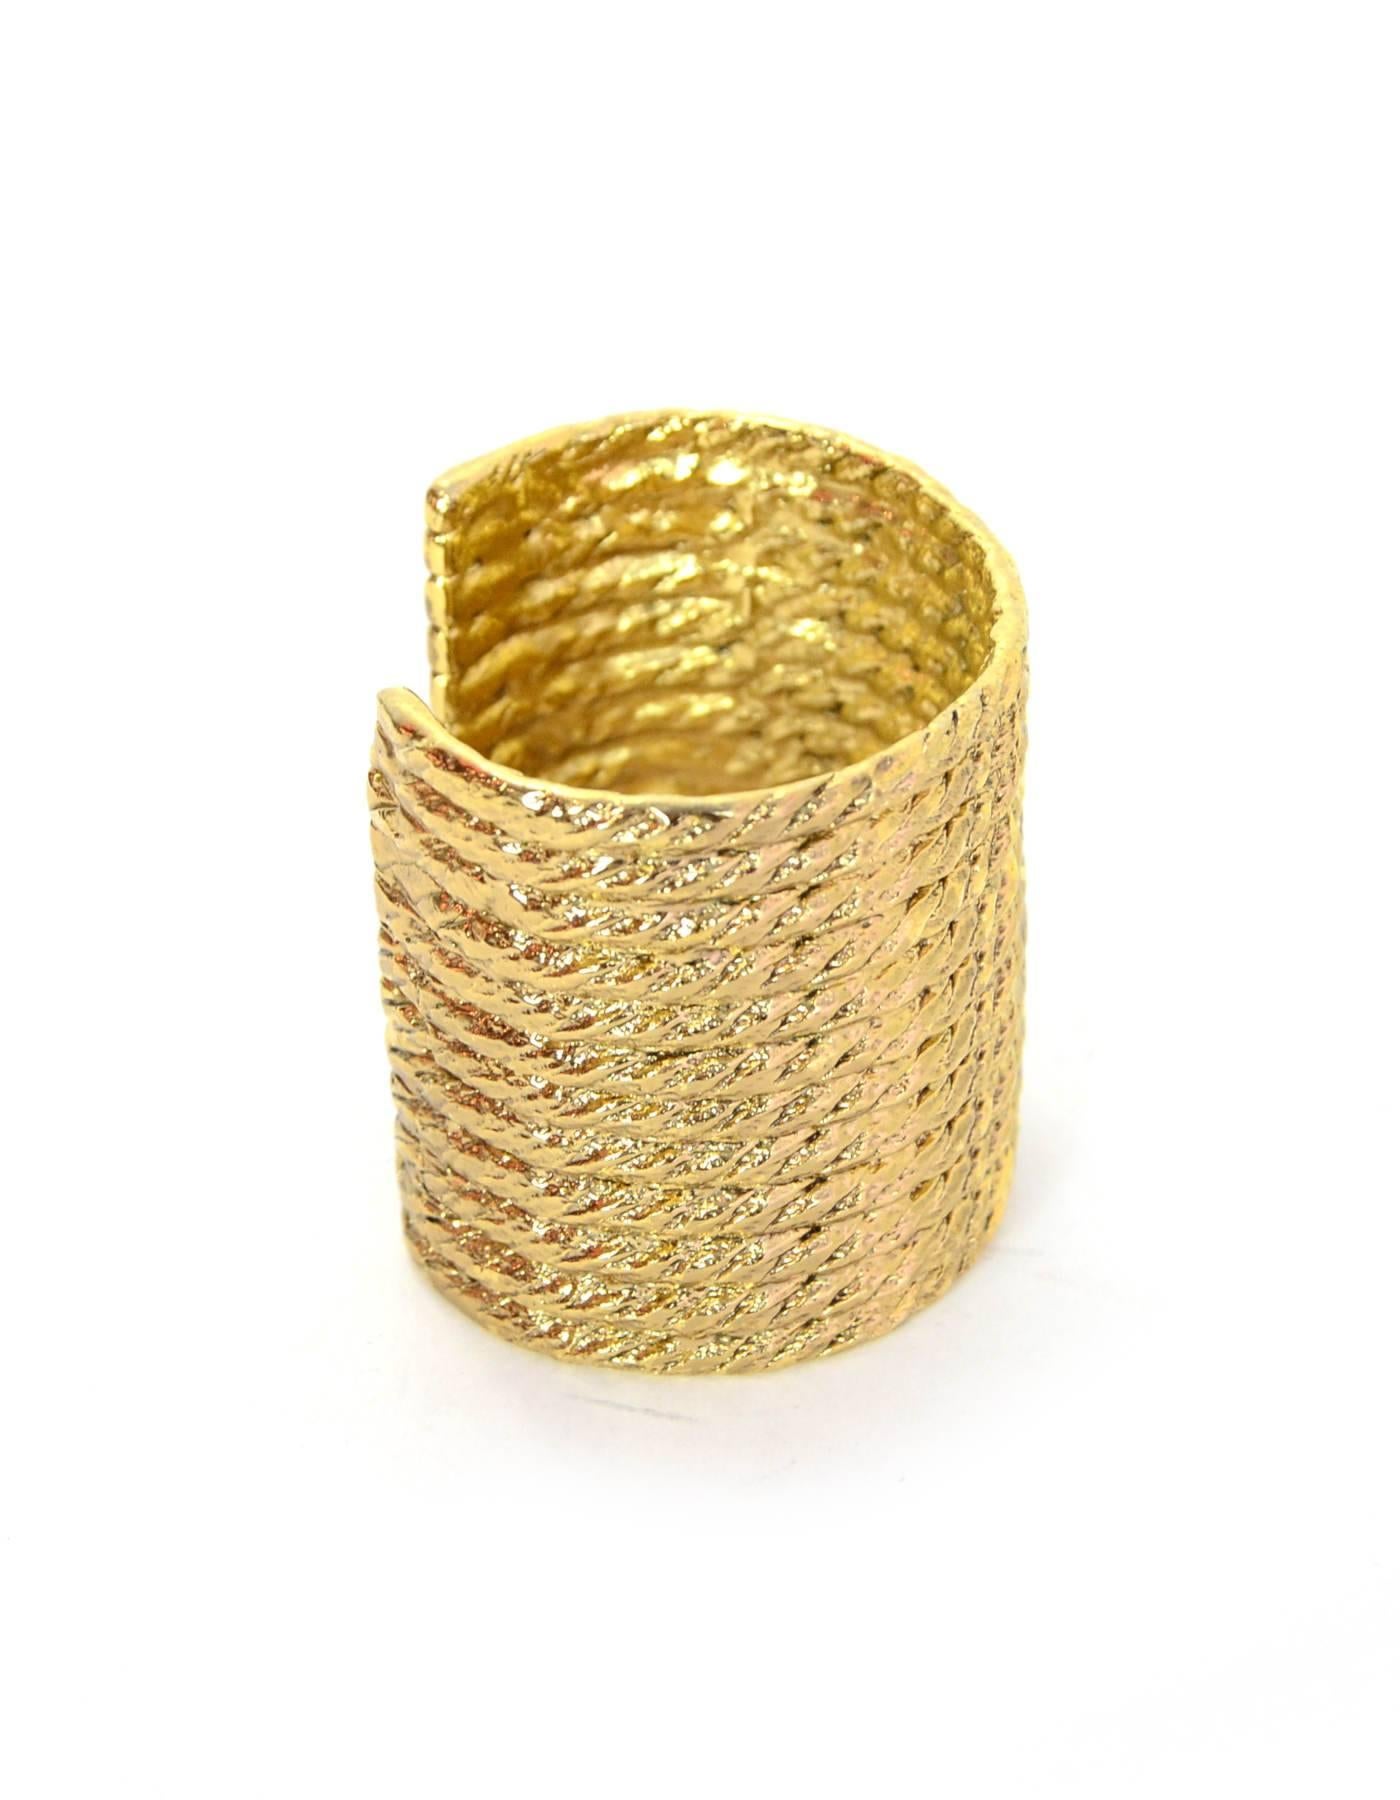 YSL Goldtone Cuff Bracelet

Color: Gold
Hardware: Goldtone
Materials: Metal
Closure/Opening: Open
Stamp: YSL
Overall Condition: Excellent pre-owned conditon, some tarnishing throughout

Measurements:
Diamater: 2.25